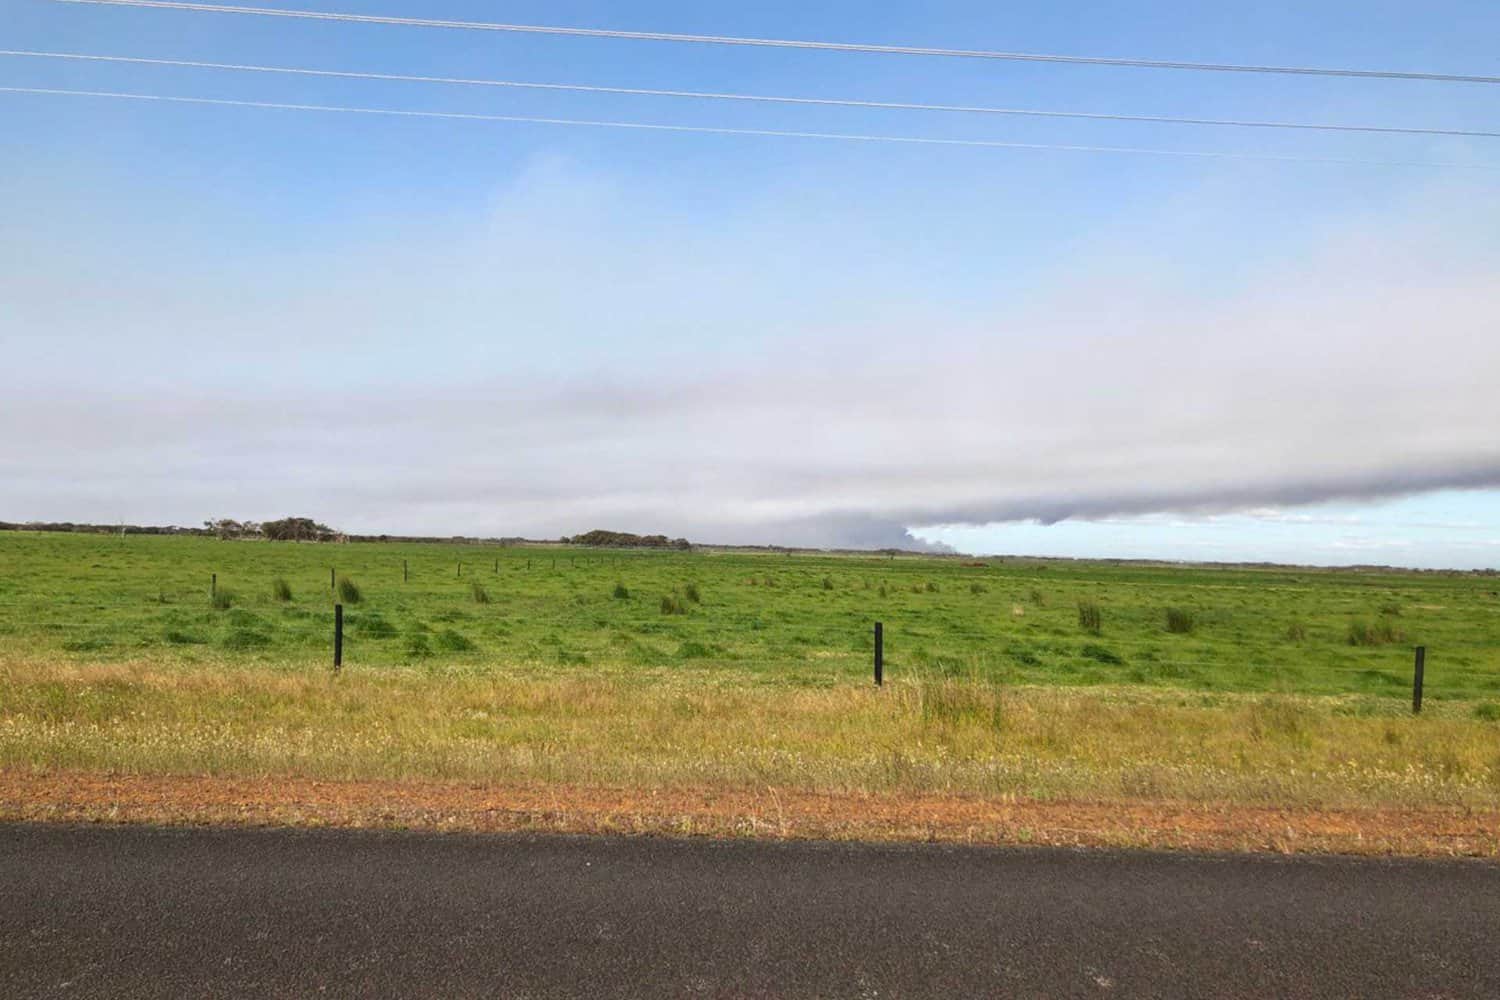 Vast, open grassland stretches to the horizon under a cloud-streaked sky, seen from a roadside perspective in rural Australia, conveying the expansive and tranquil landscape typical of Australia.